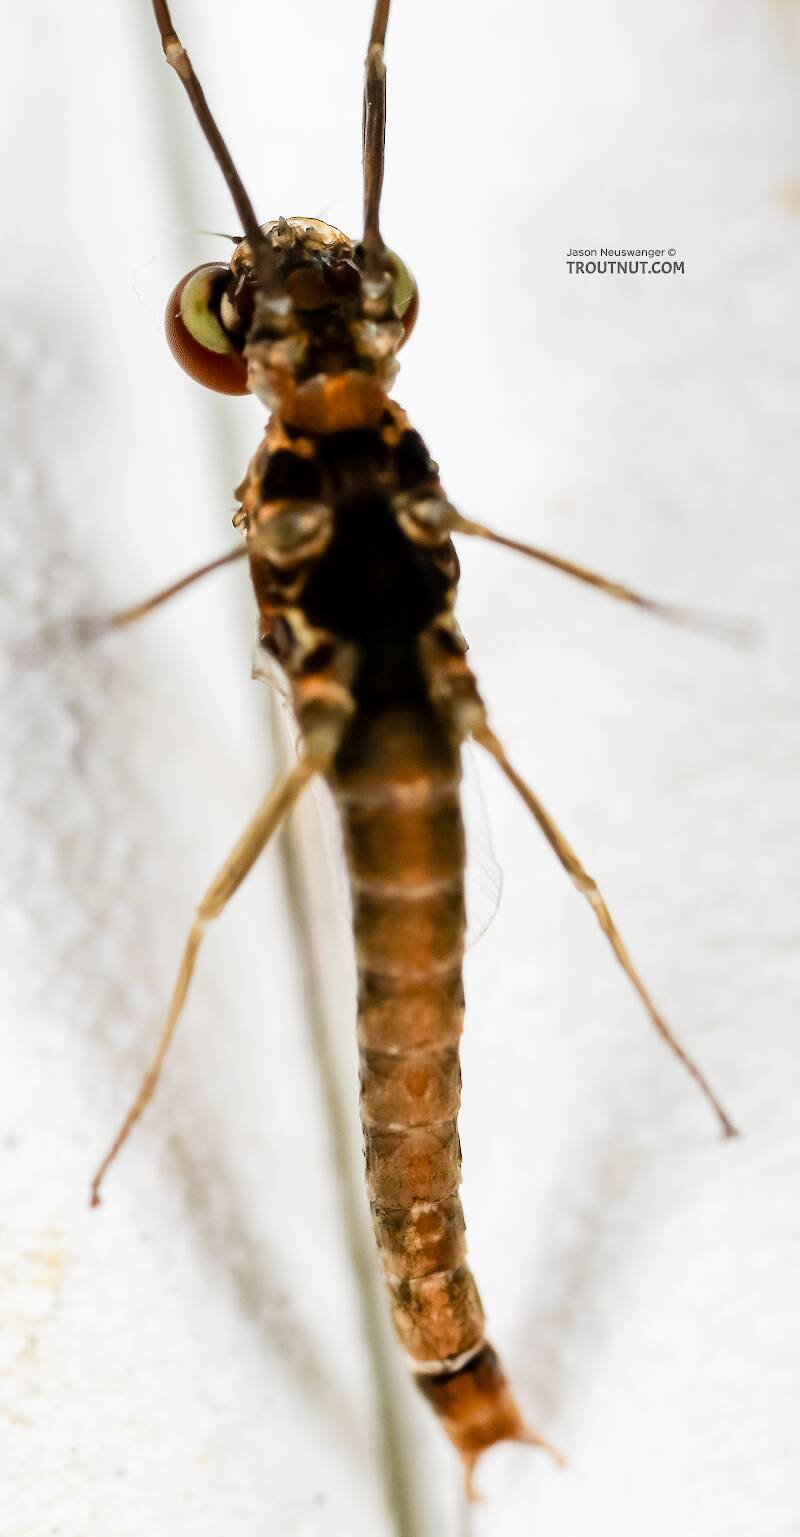 Ventral view of a Male Ephemerella excrucians (Ephemerellidae) (Pale Morning Dun) Mayfly Spinner from the Henry's Fork of the Snake River in Idaho